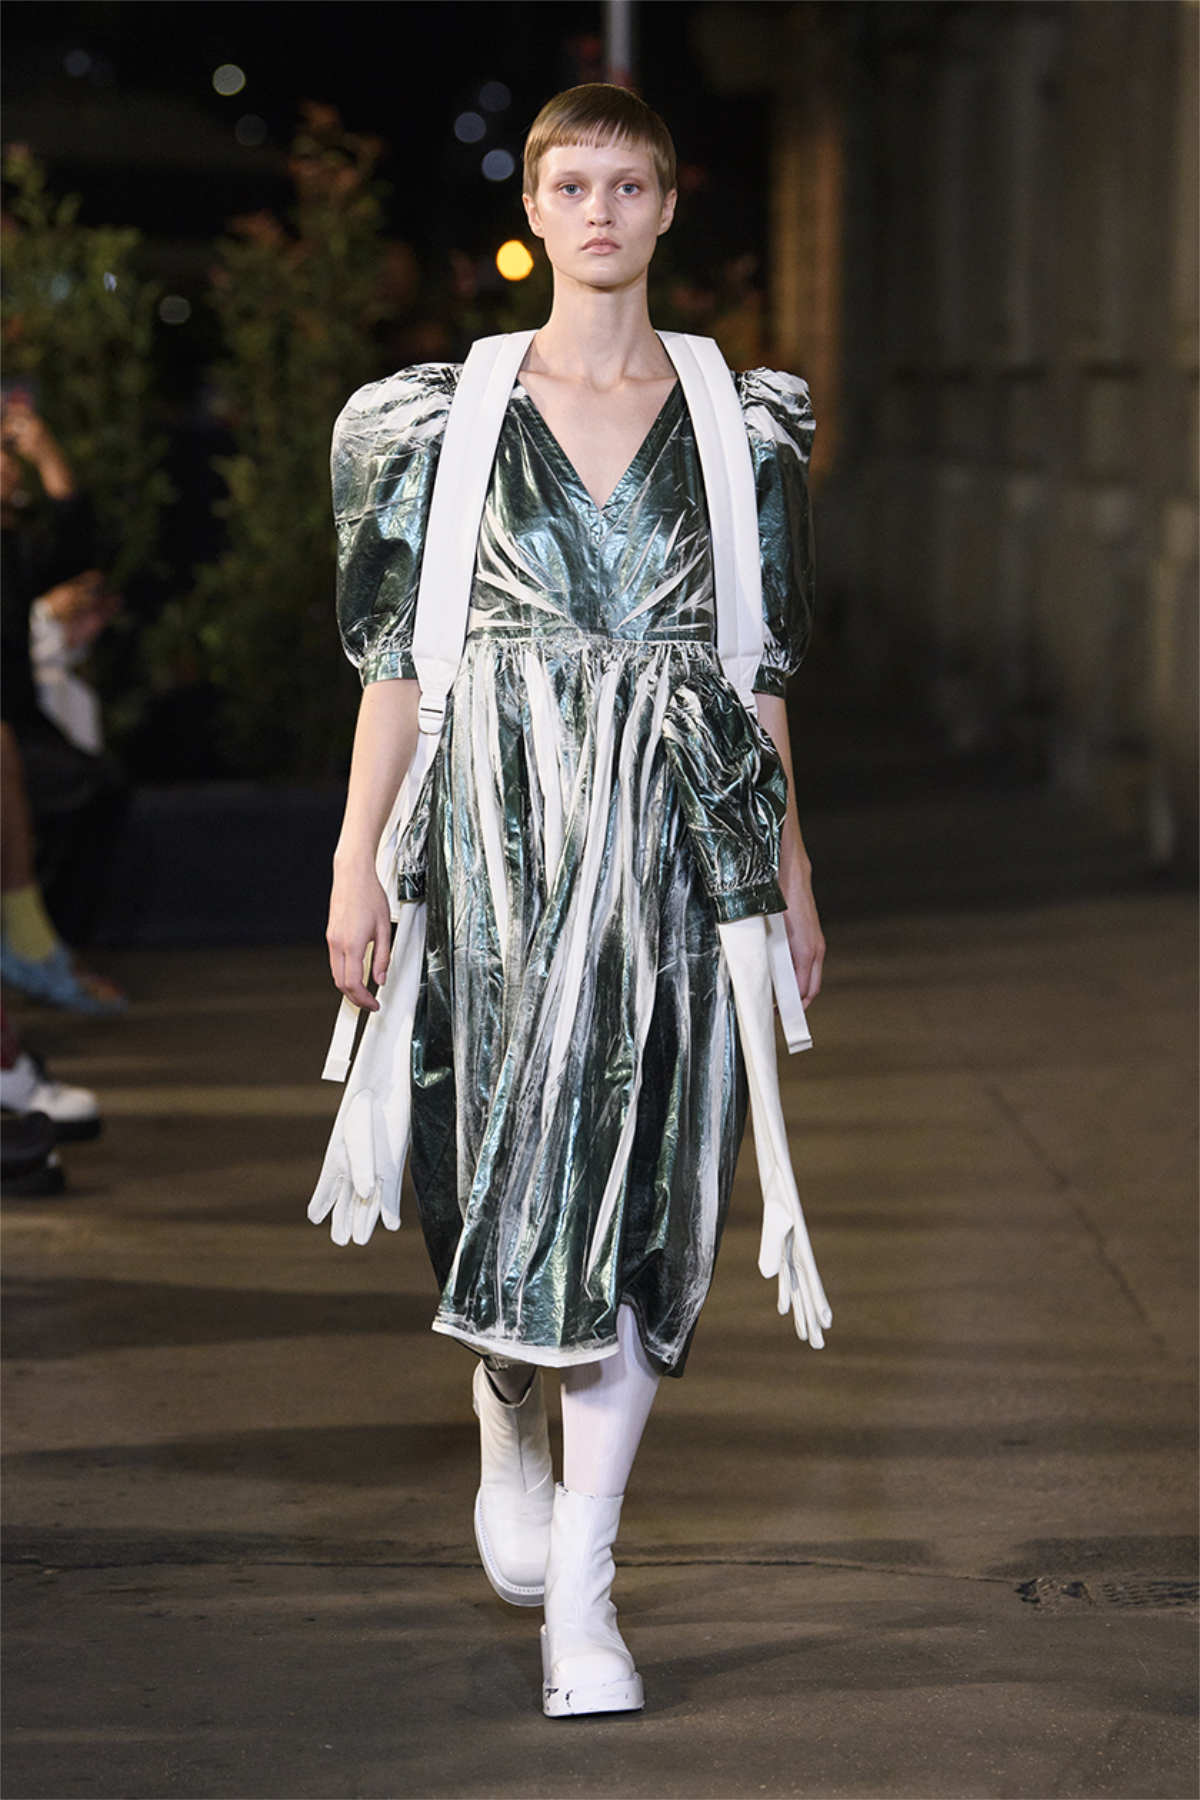 MM6 Maison Margiela Presents Its New Spring Summer 2022 Collection